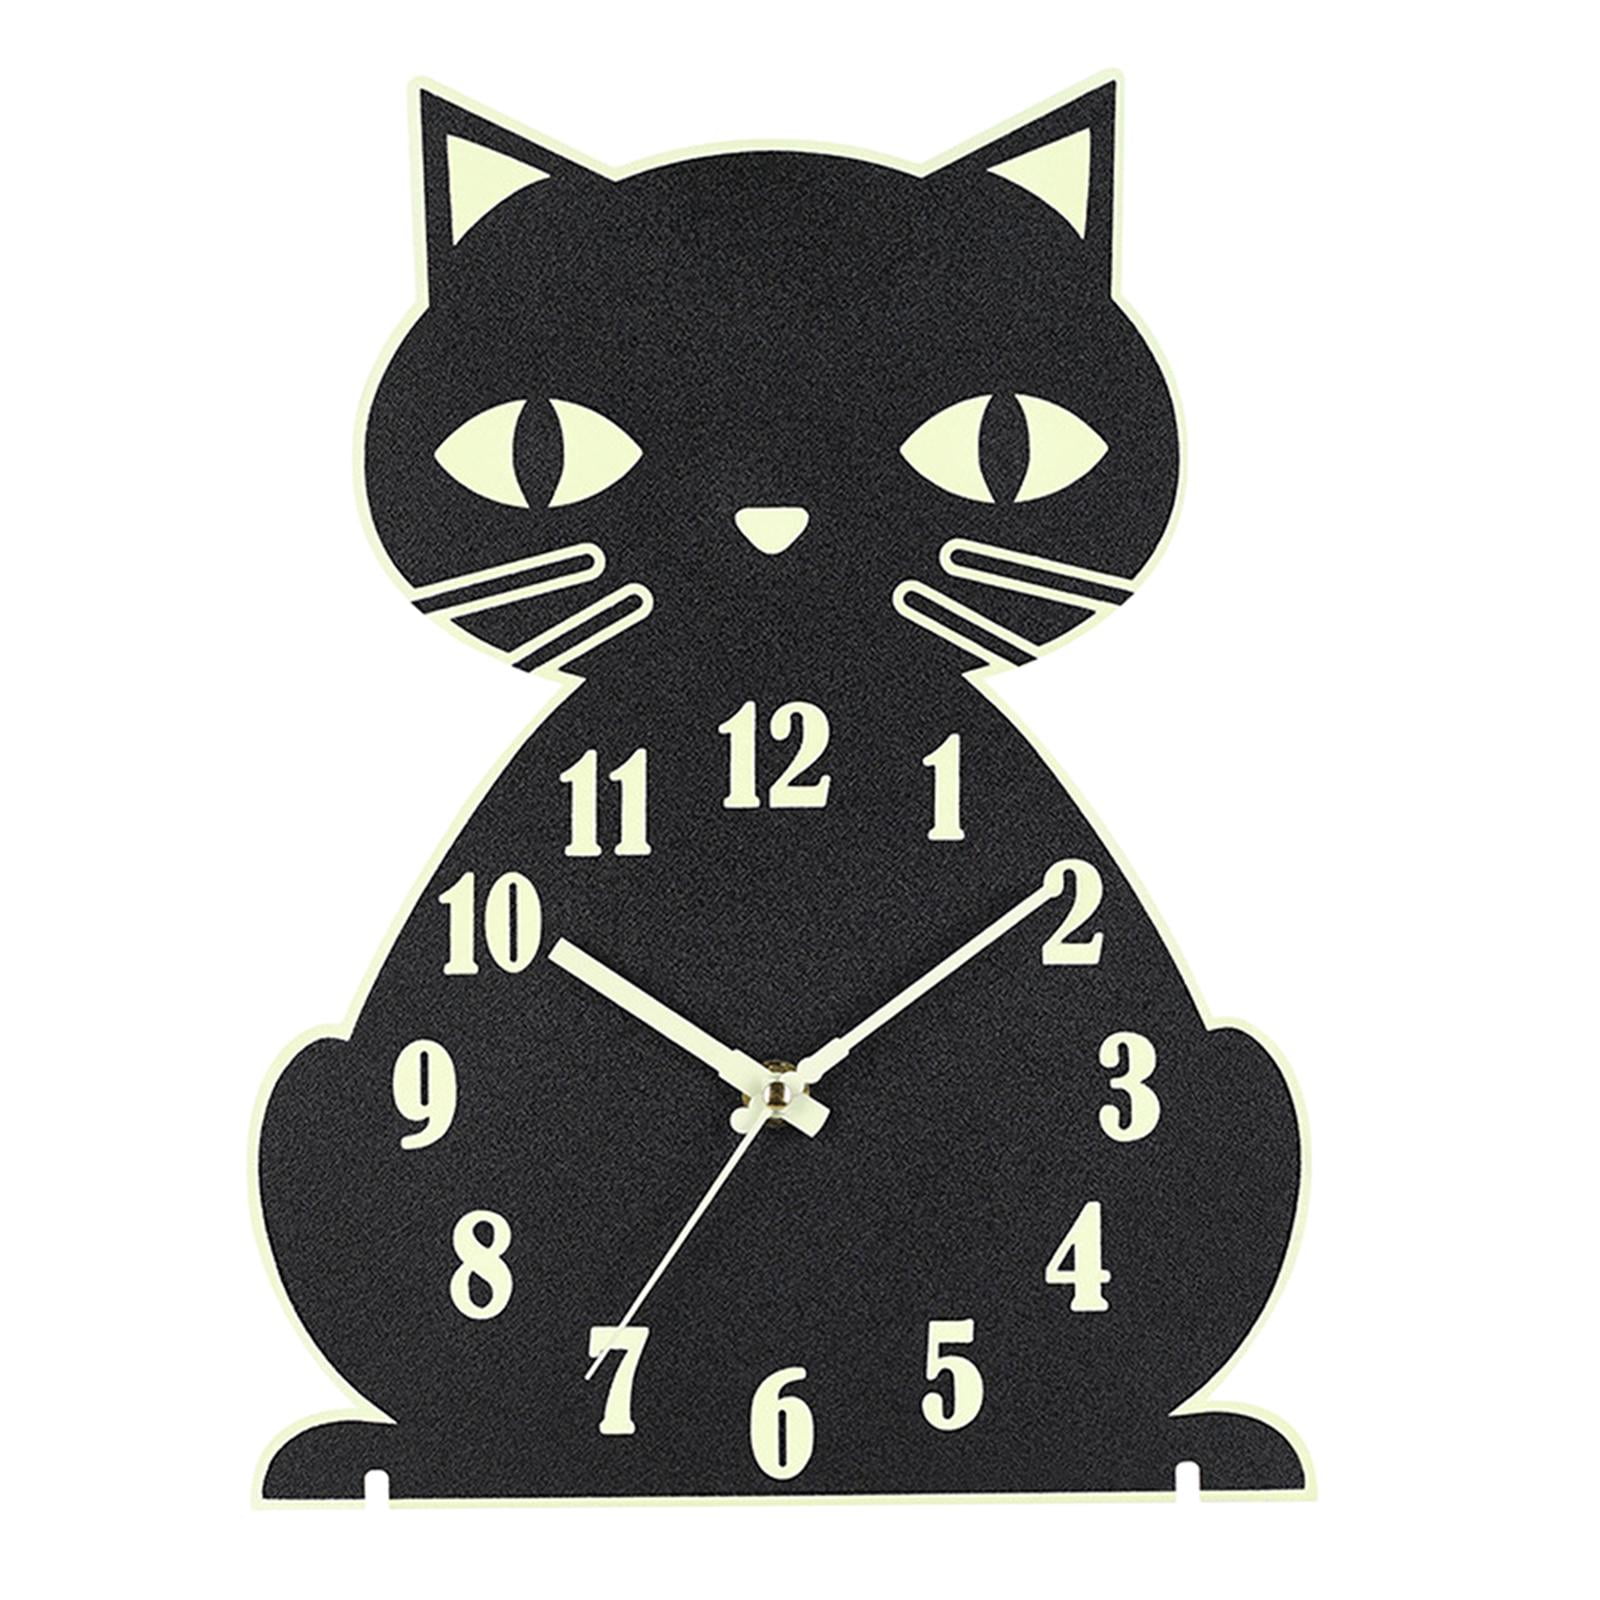 Decorative Acrylic Spooted Cat Wall Clock w/ Wagging Tail Home Office Decor 